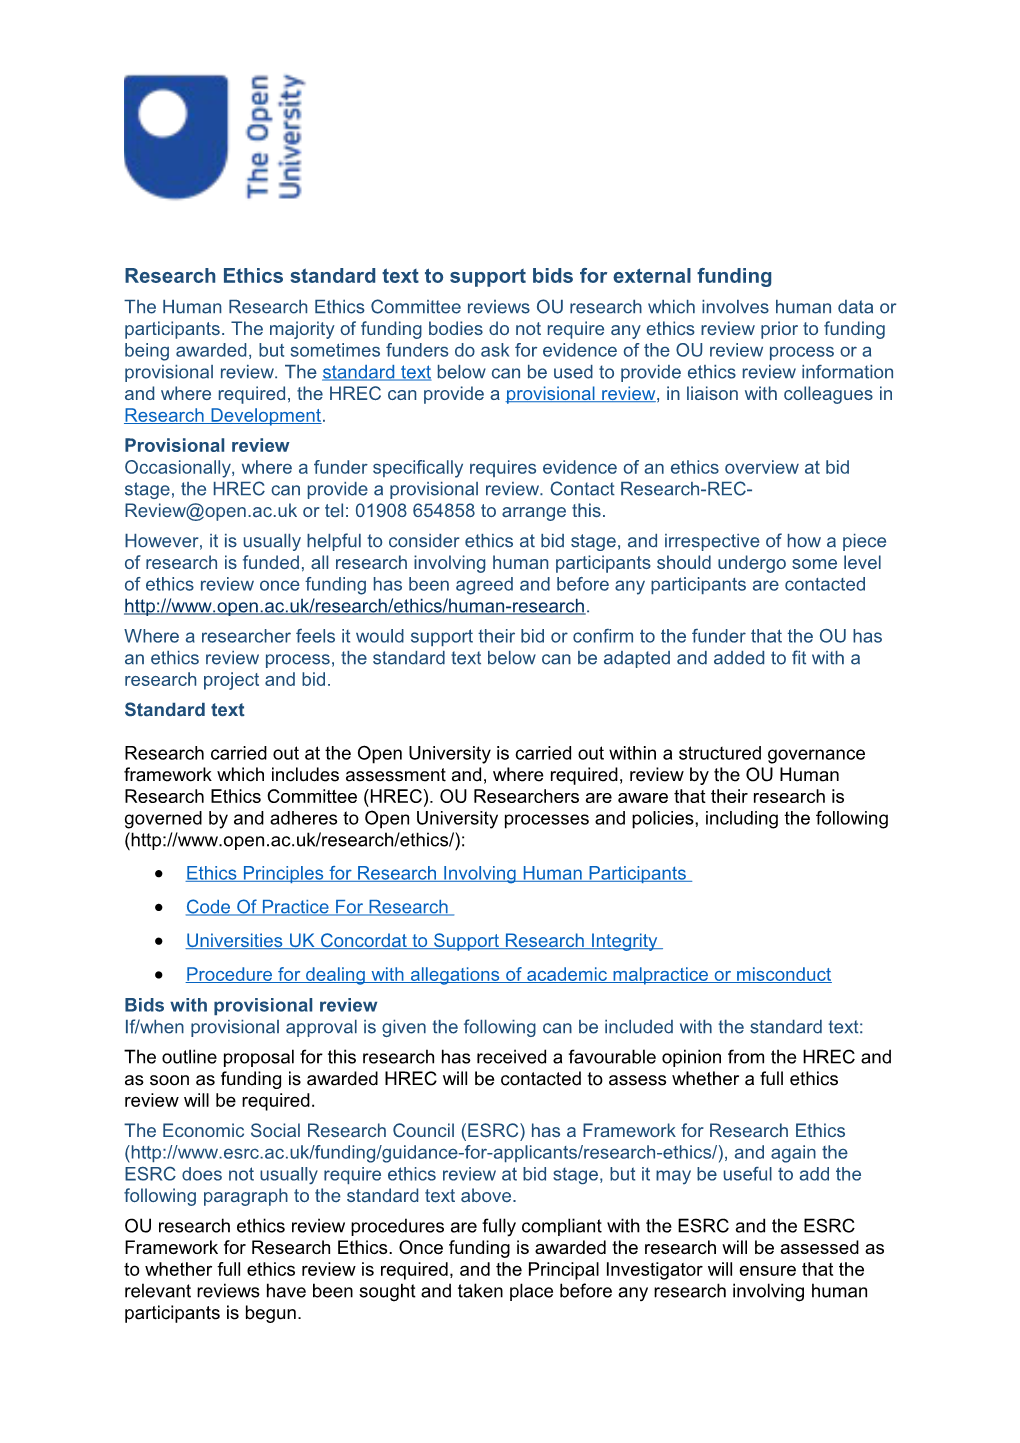 Research Ethics Standart Text to Support Bids for External Funding